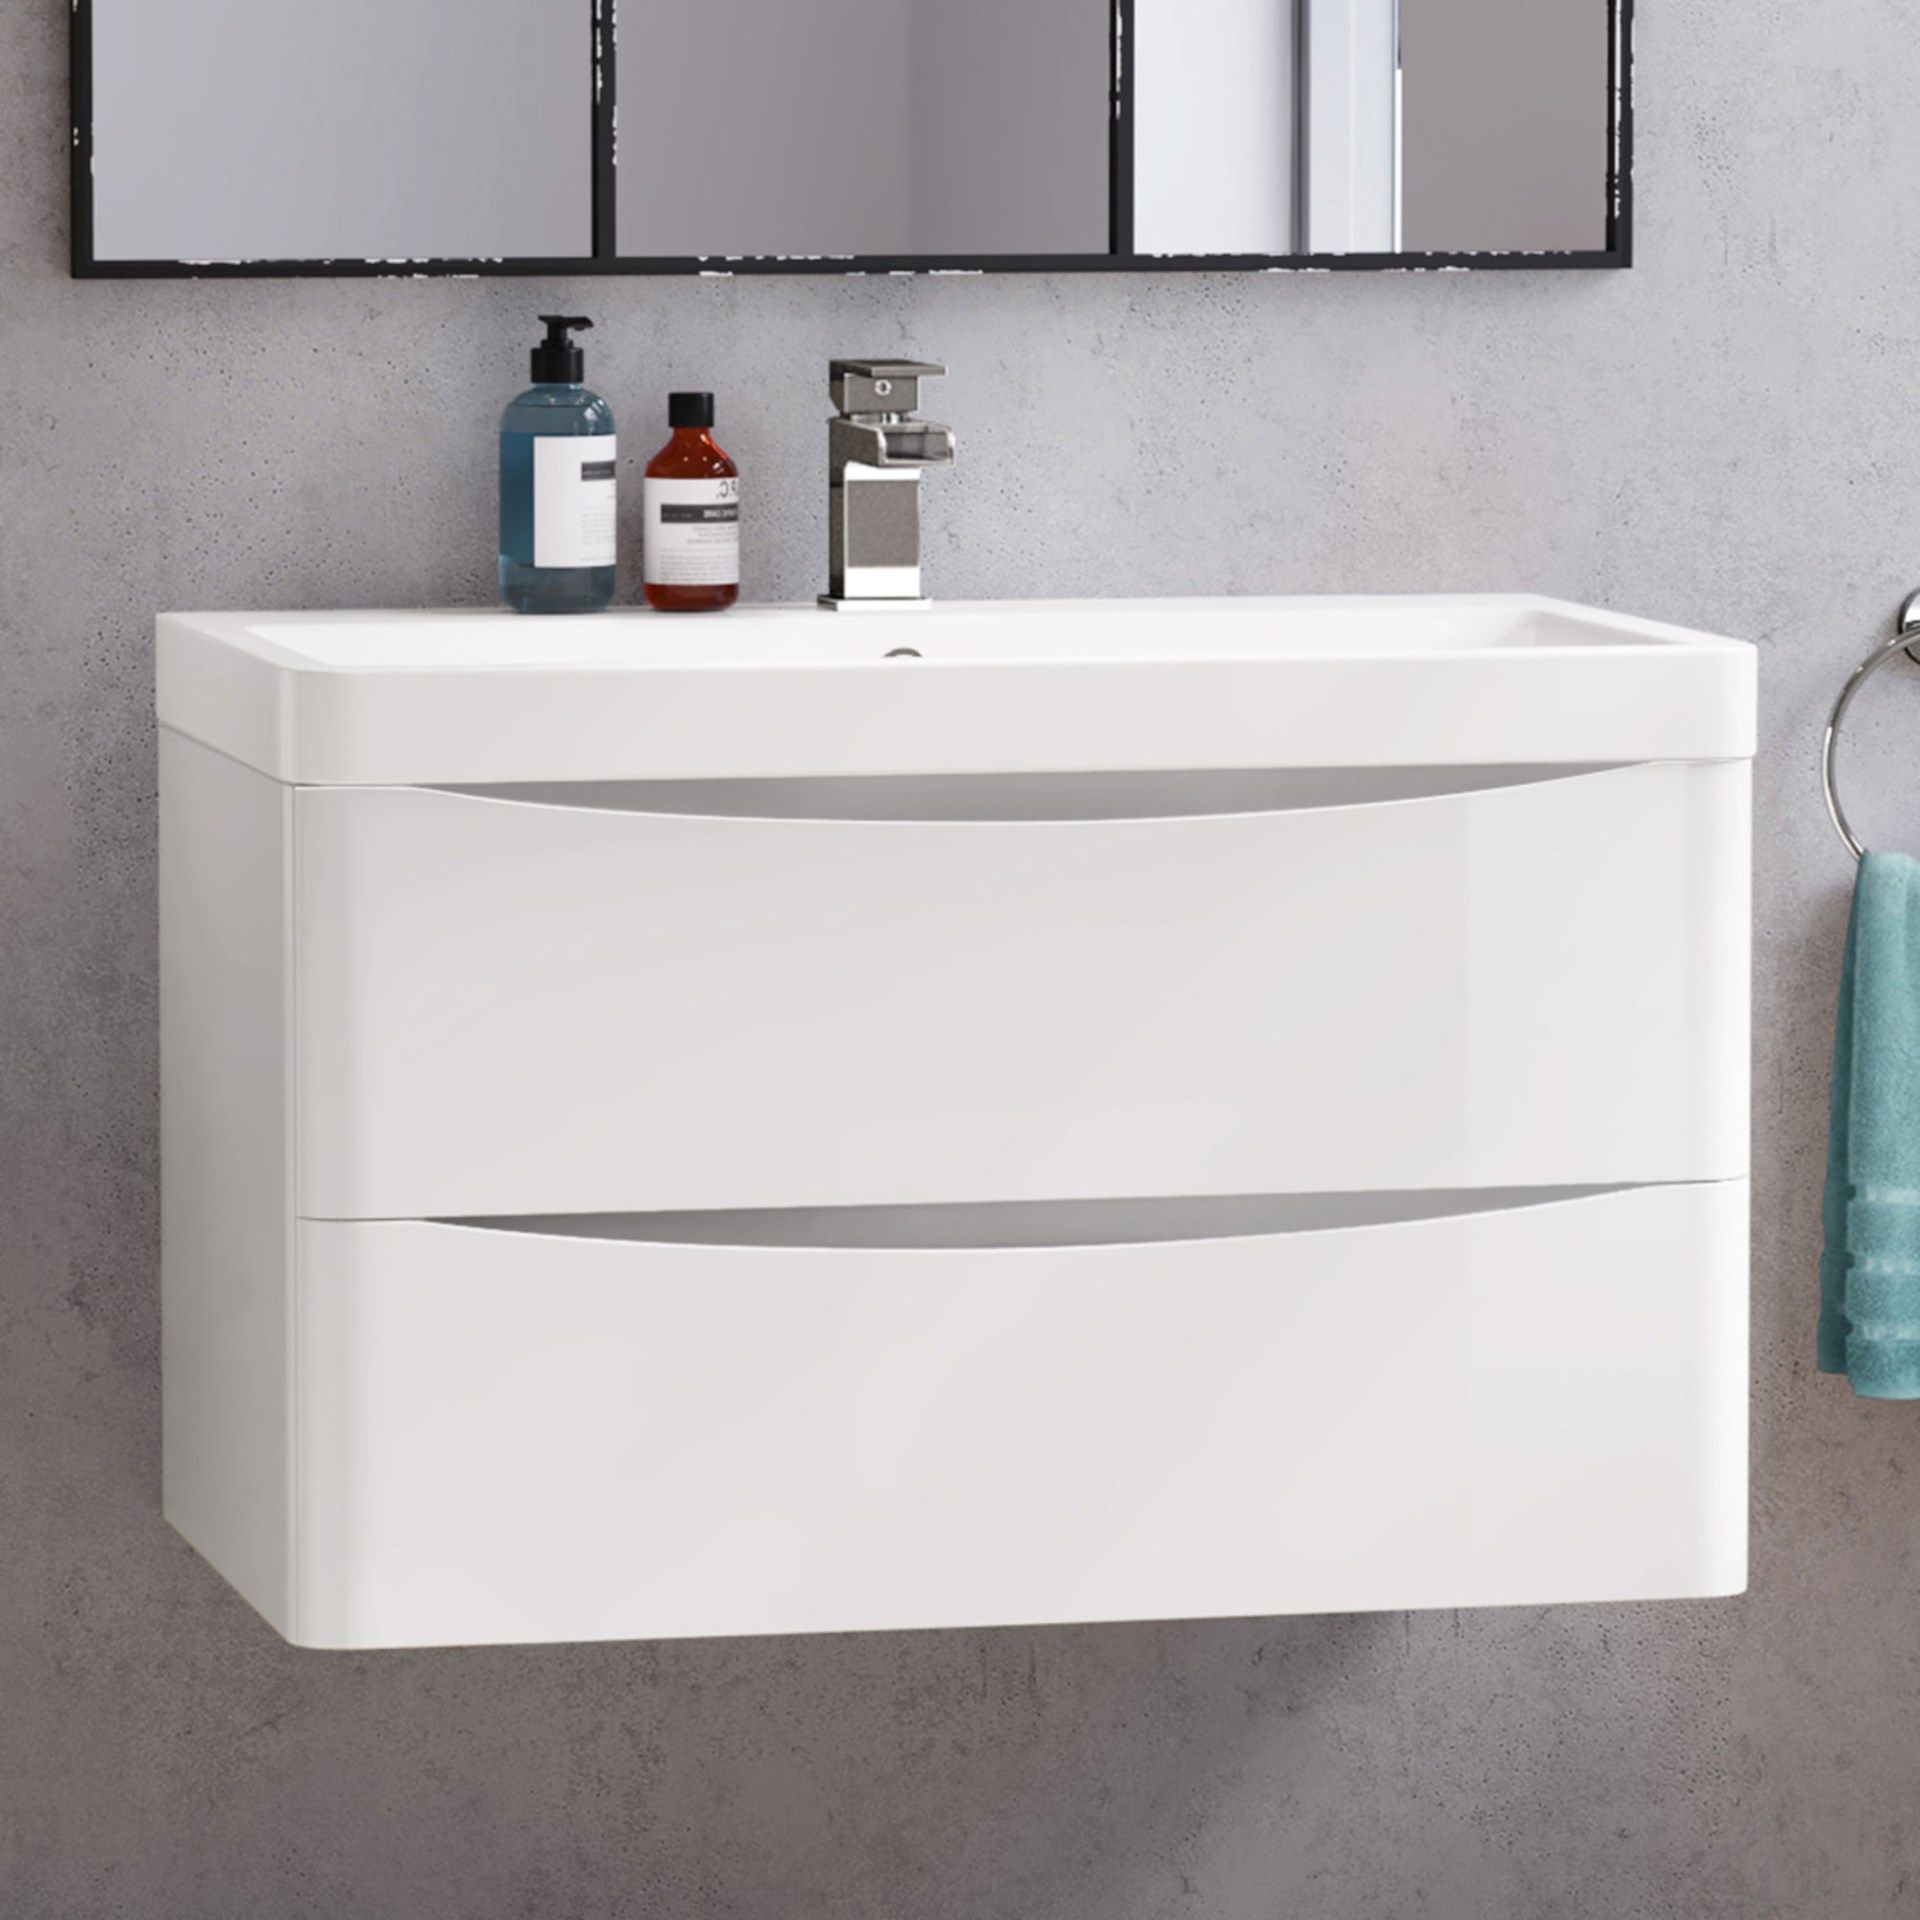 (CP11) 1000mm Austin II Gloss White Built In Basin Drawer Unit - Wall Hung. RRP £499.99. Comes...